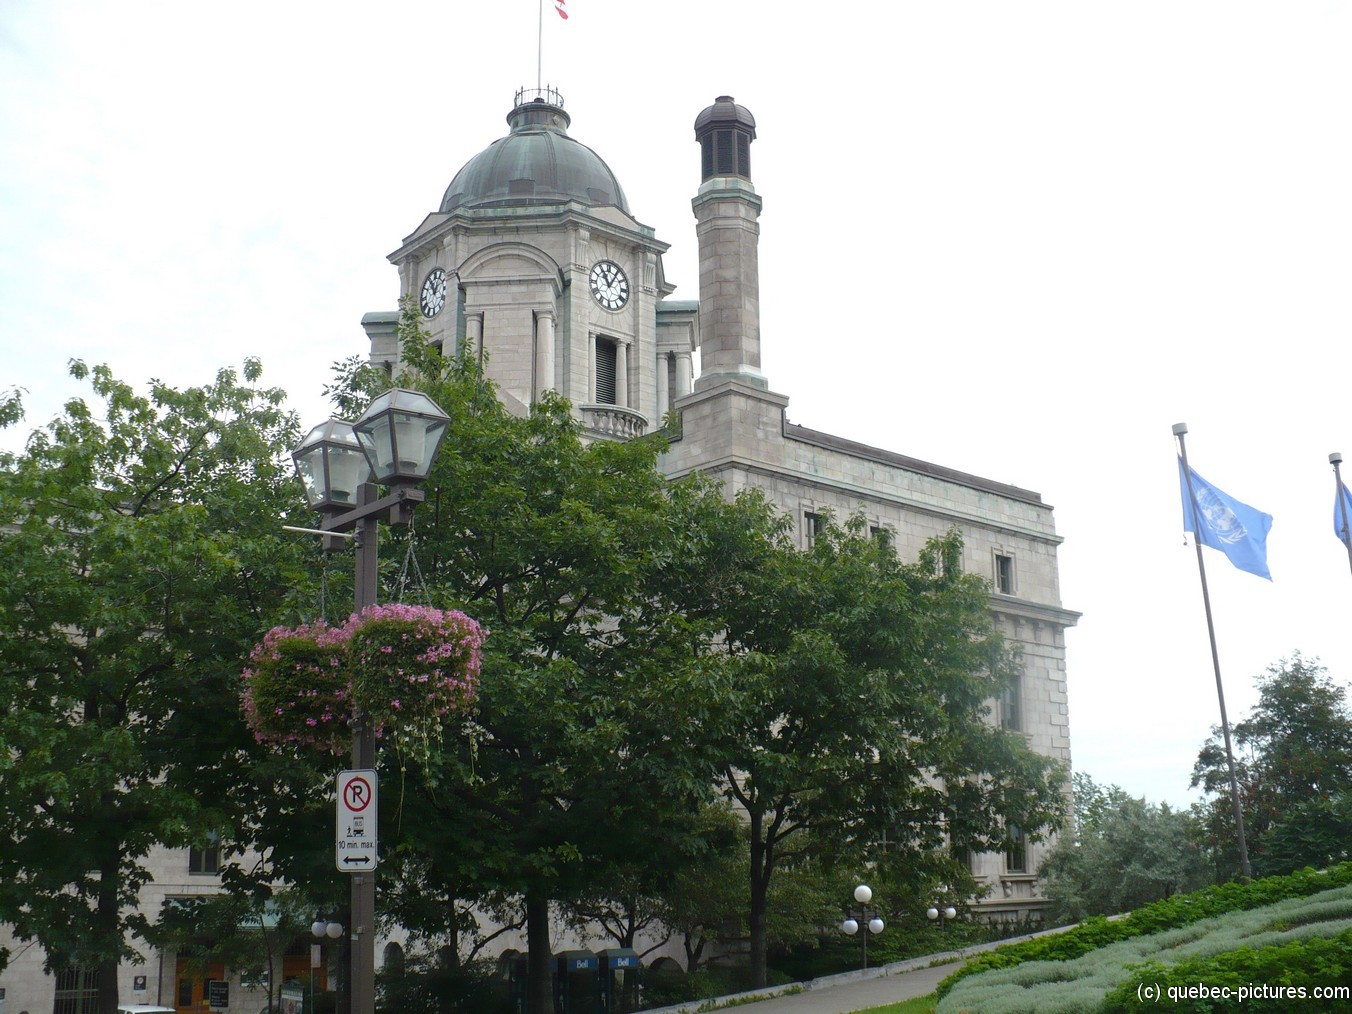 Building with green dome top and clock in Old Quebec City.jpg
